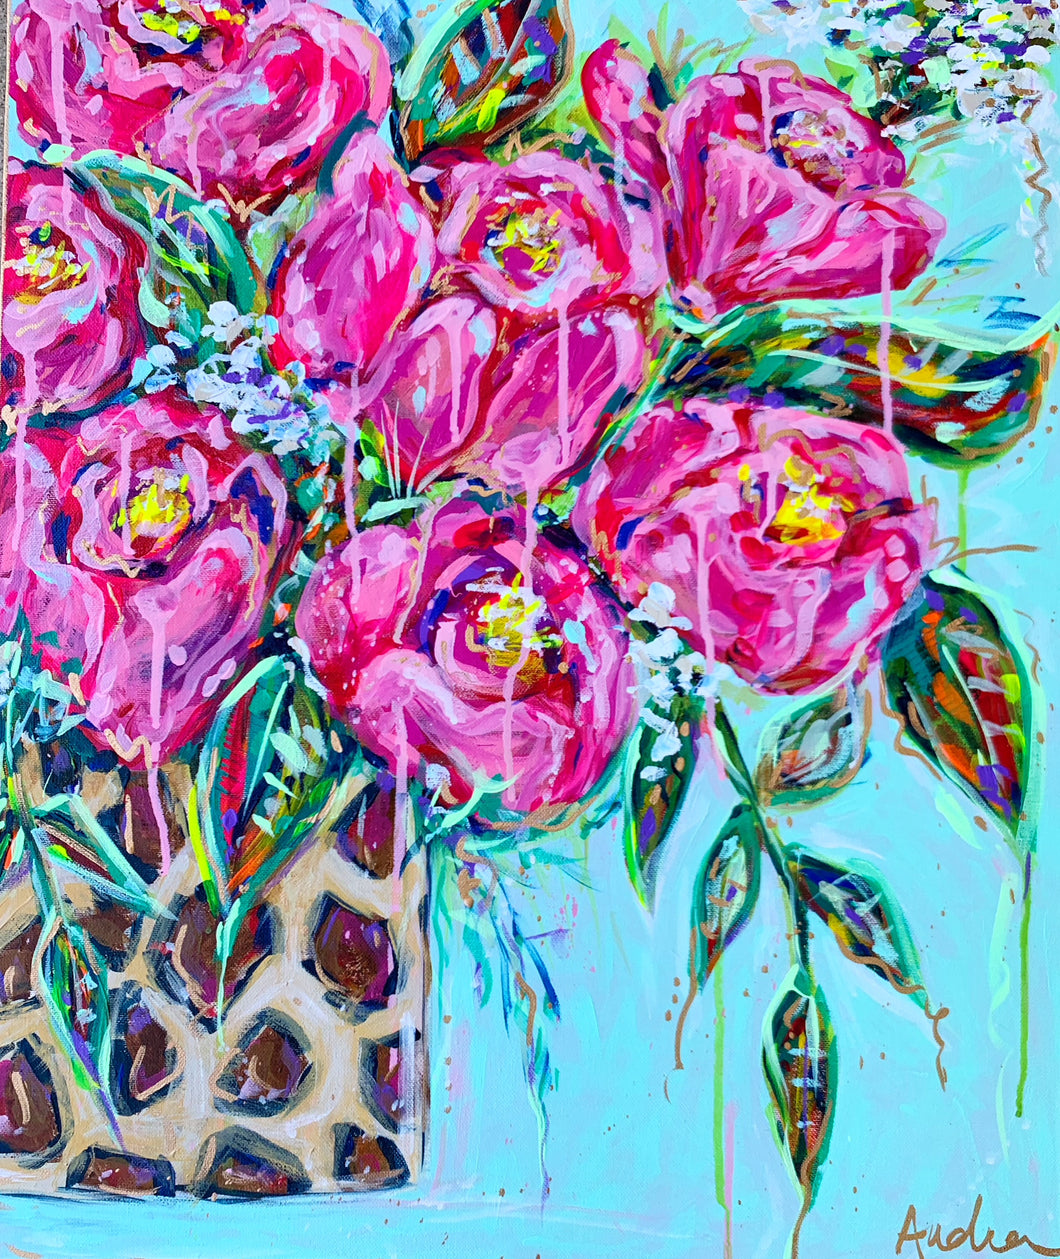 Roses in Leopard Vase Original Painting on Canvas - 20x24